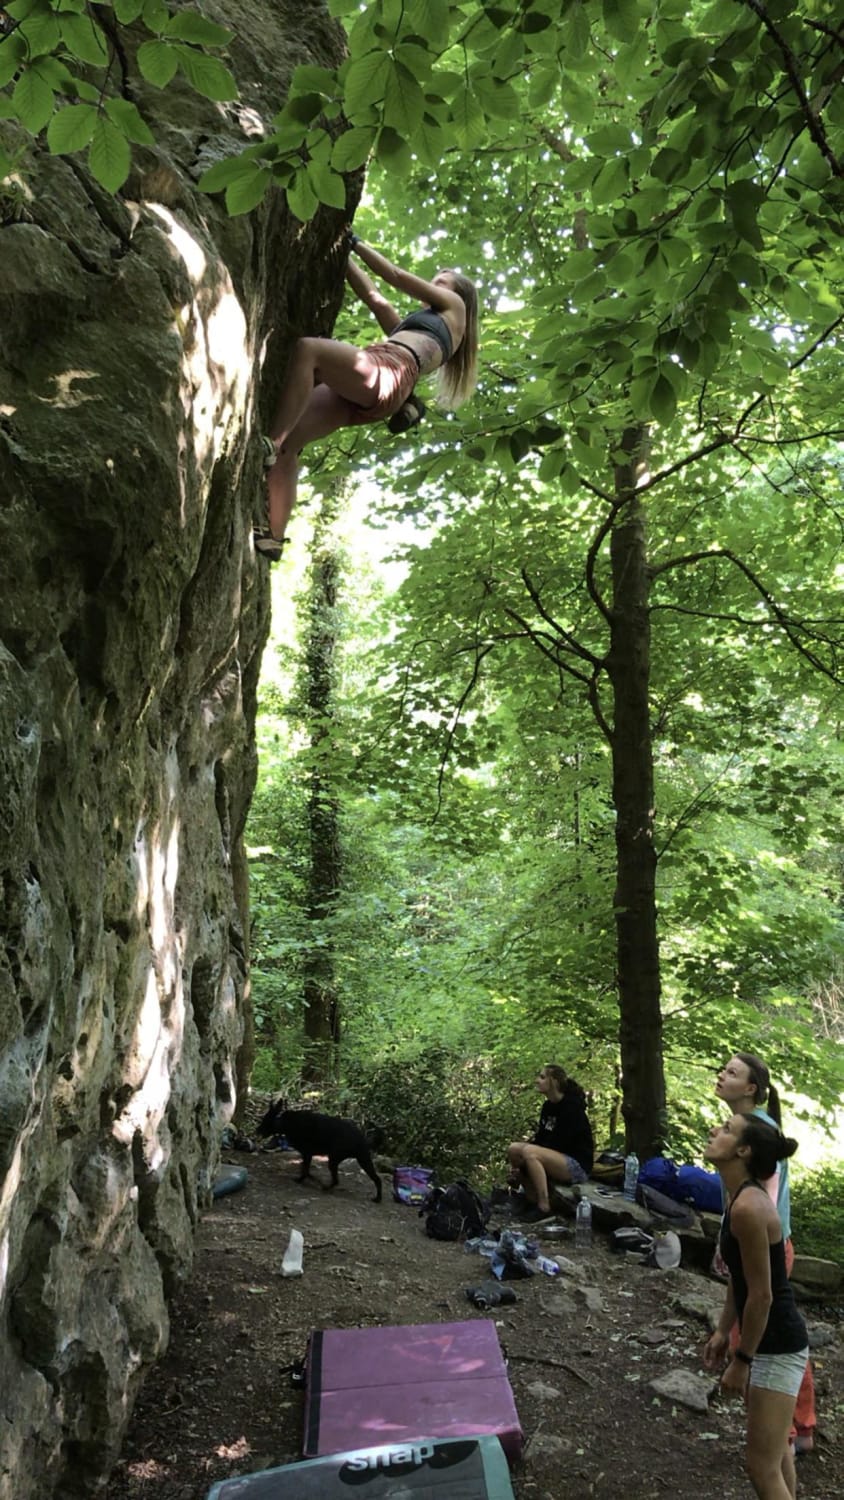 Not being able to travel has got me appreciating English climbing more than I ever would have otherwise